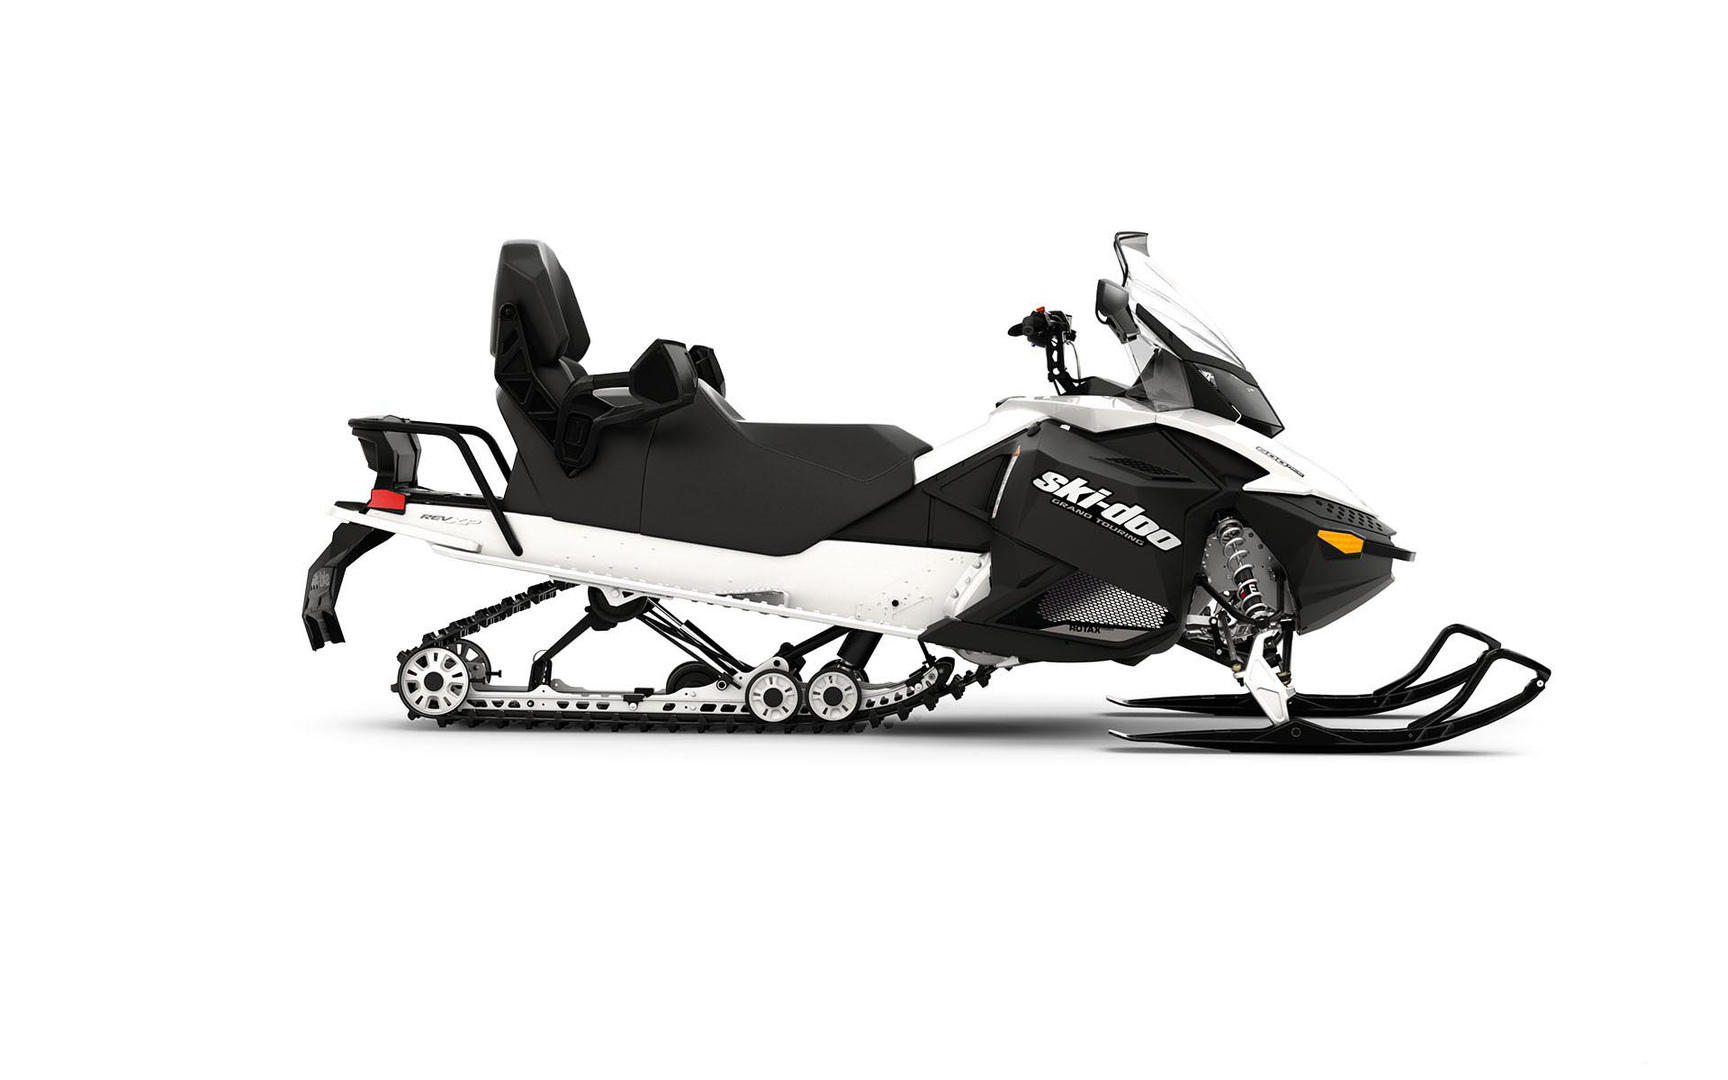 Brp grand touring. Grand Touring Sport 600 Ace. BRP Grand Touring 600 Ace. Ski Doo Grand Touring 550. Снегоход Ski Doo Grand Touring.